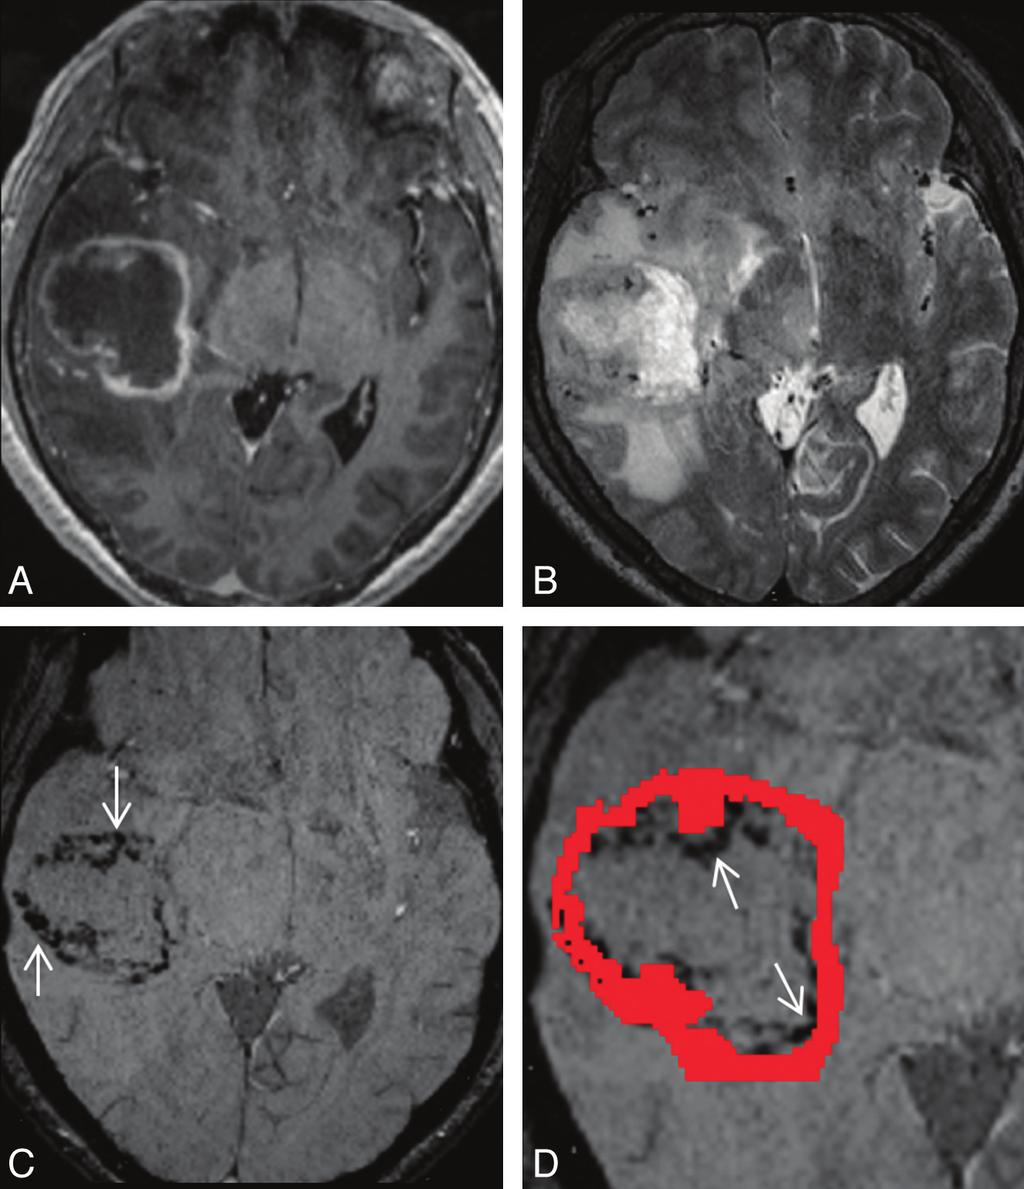 Fig 2. A 57-year-old man with a right temporal necrotic glioblastoma. A, Transverse contrast-enhanced MPRAGE shows a rim-enhancing mass in the right temporal lobe.